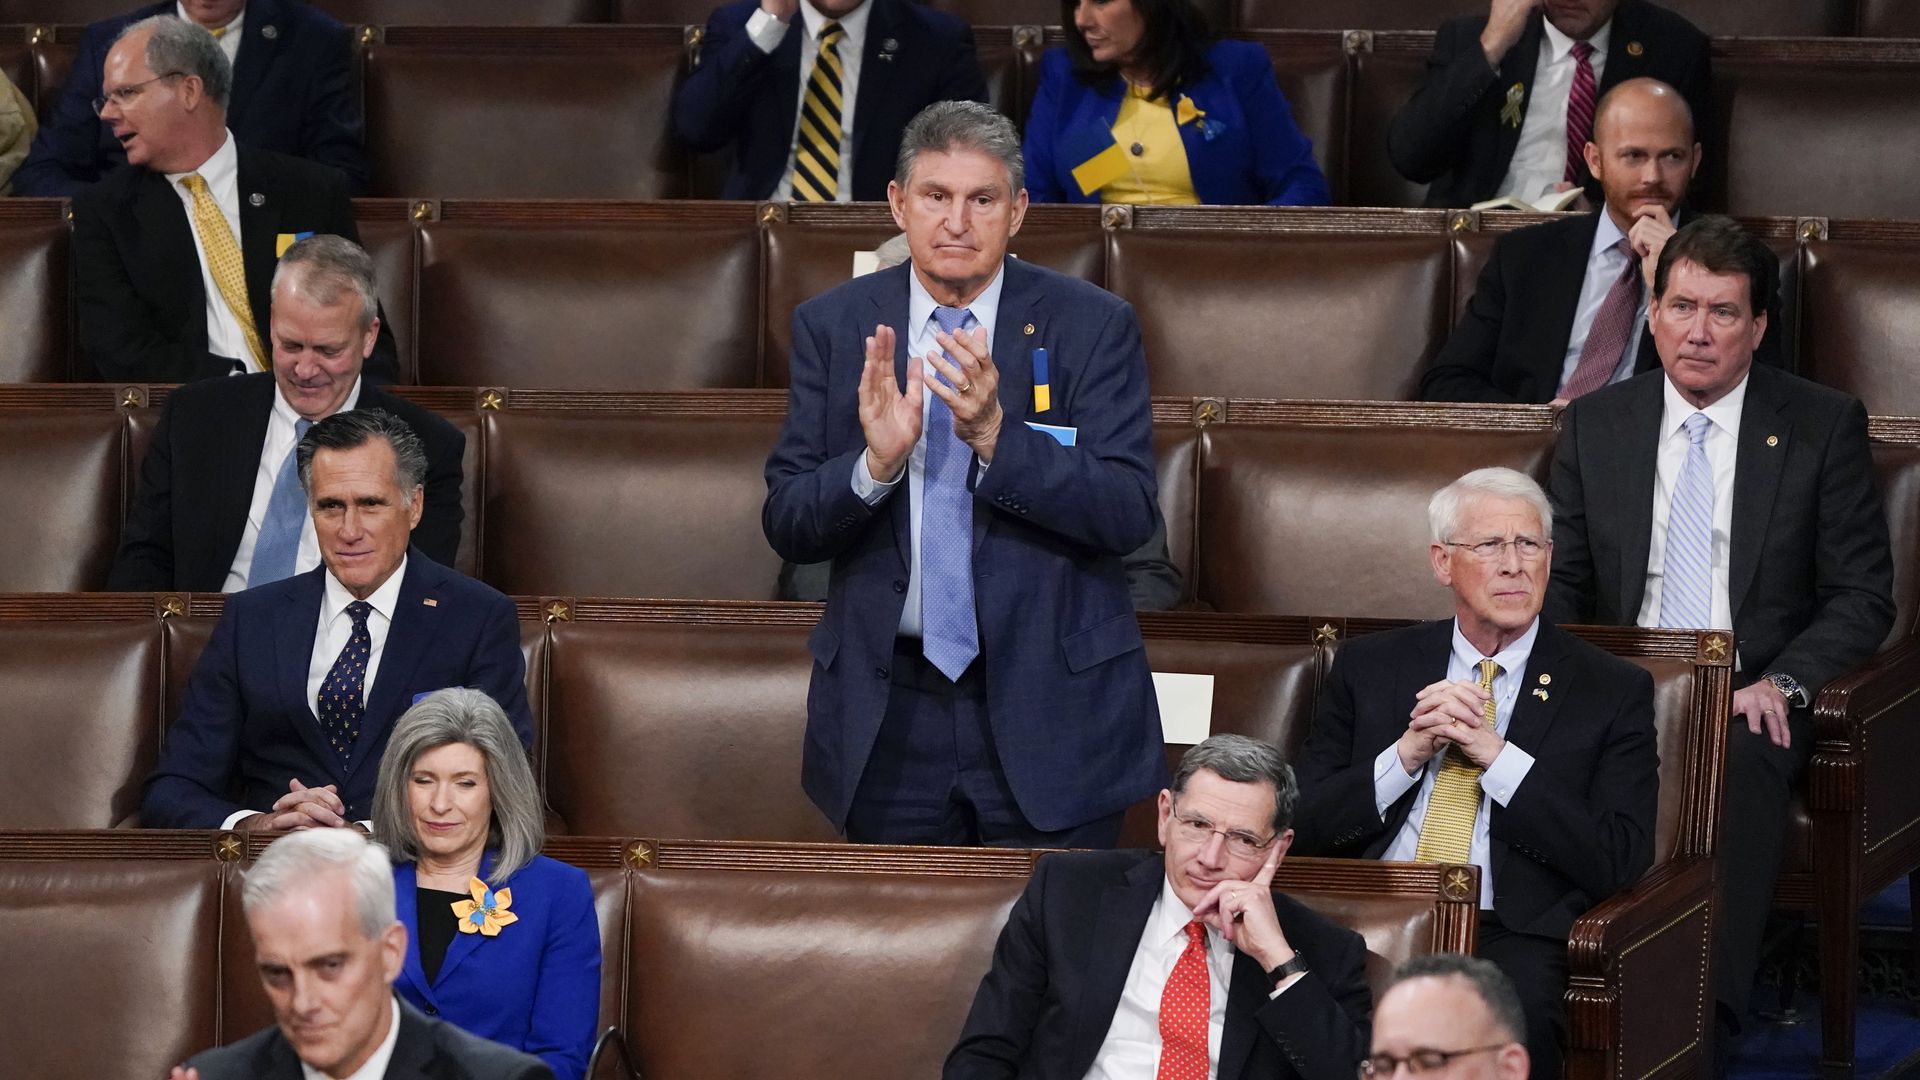 Sen. Joe Manchin is seen standing and clapping while seated between Republicans for the State of the Union address.